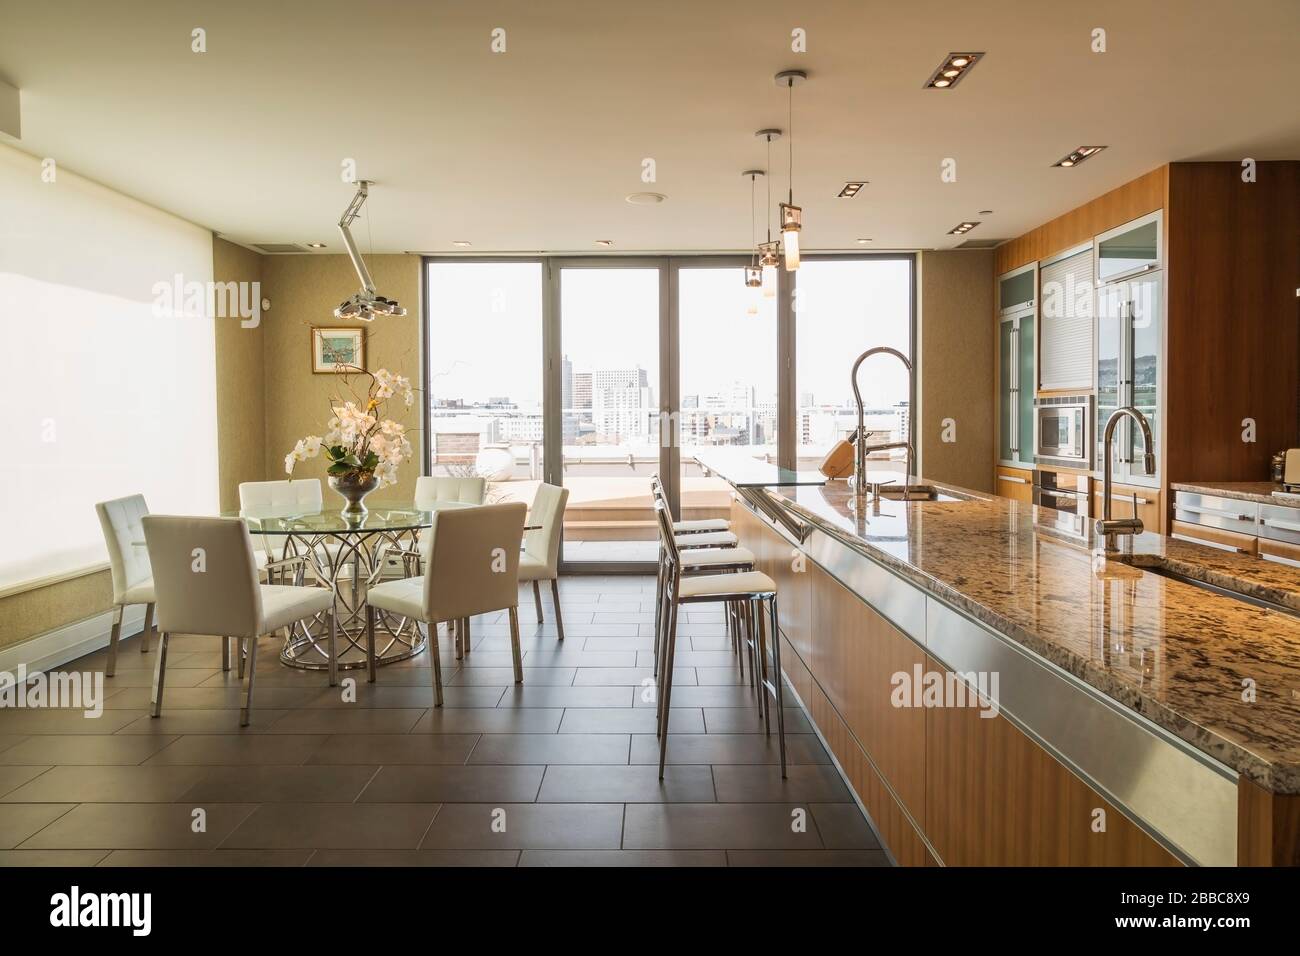 Round glass dining table with white leather chairs, wood and glass cabinets and island with grey nuanced granite countertop and white leather high back chairs in kitchen with grey marble tile floor inside a modern luxurious multistory penthouse condominium unit, Old Montreal, Quebec, Canada. This image is property released for publication in calendars and editorial use. EUPR0359 Stock Photo